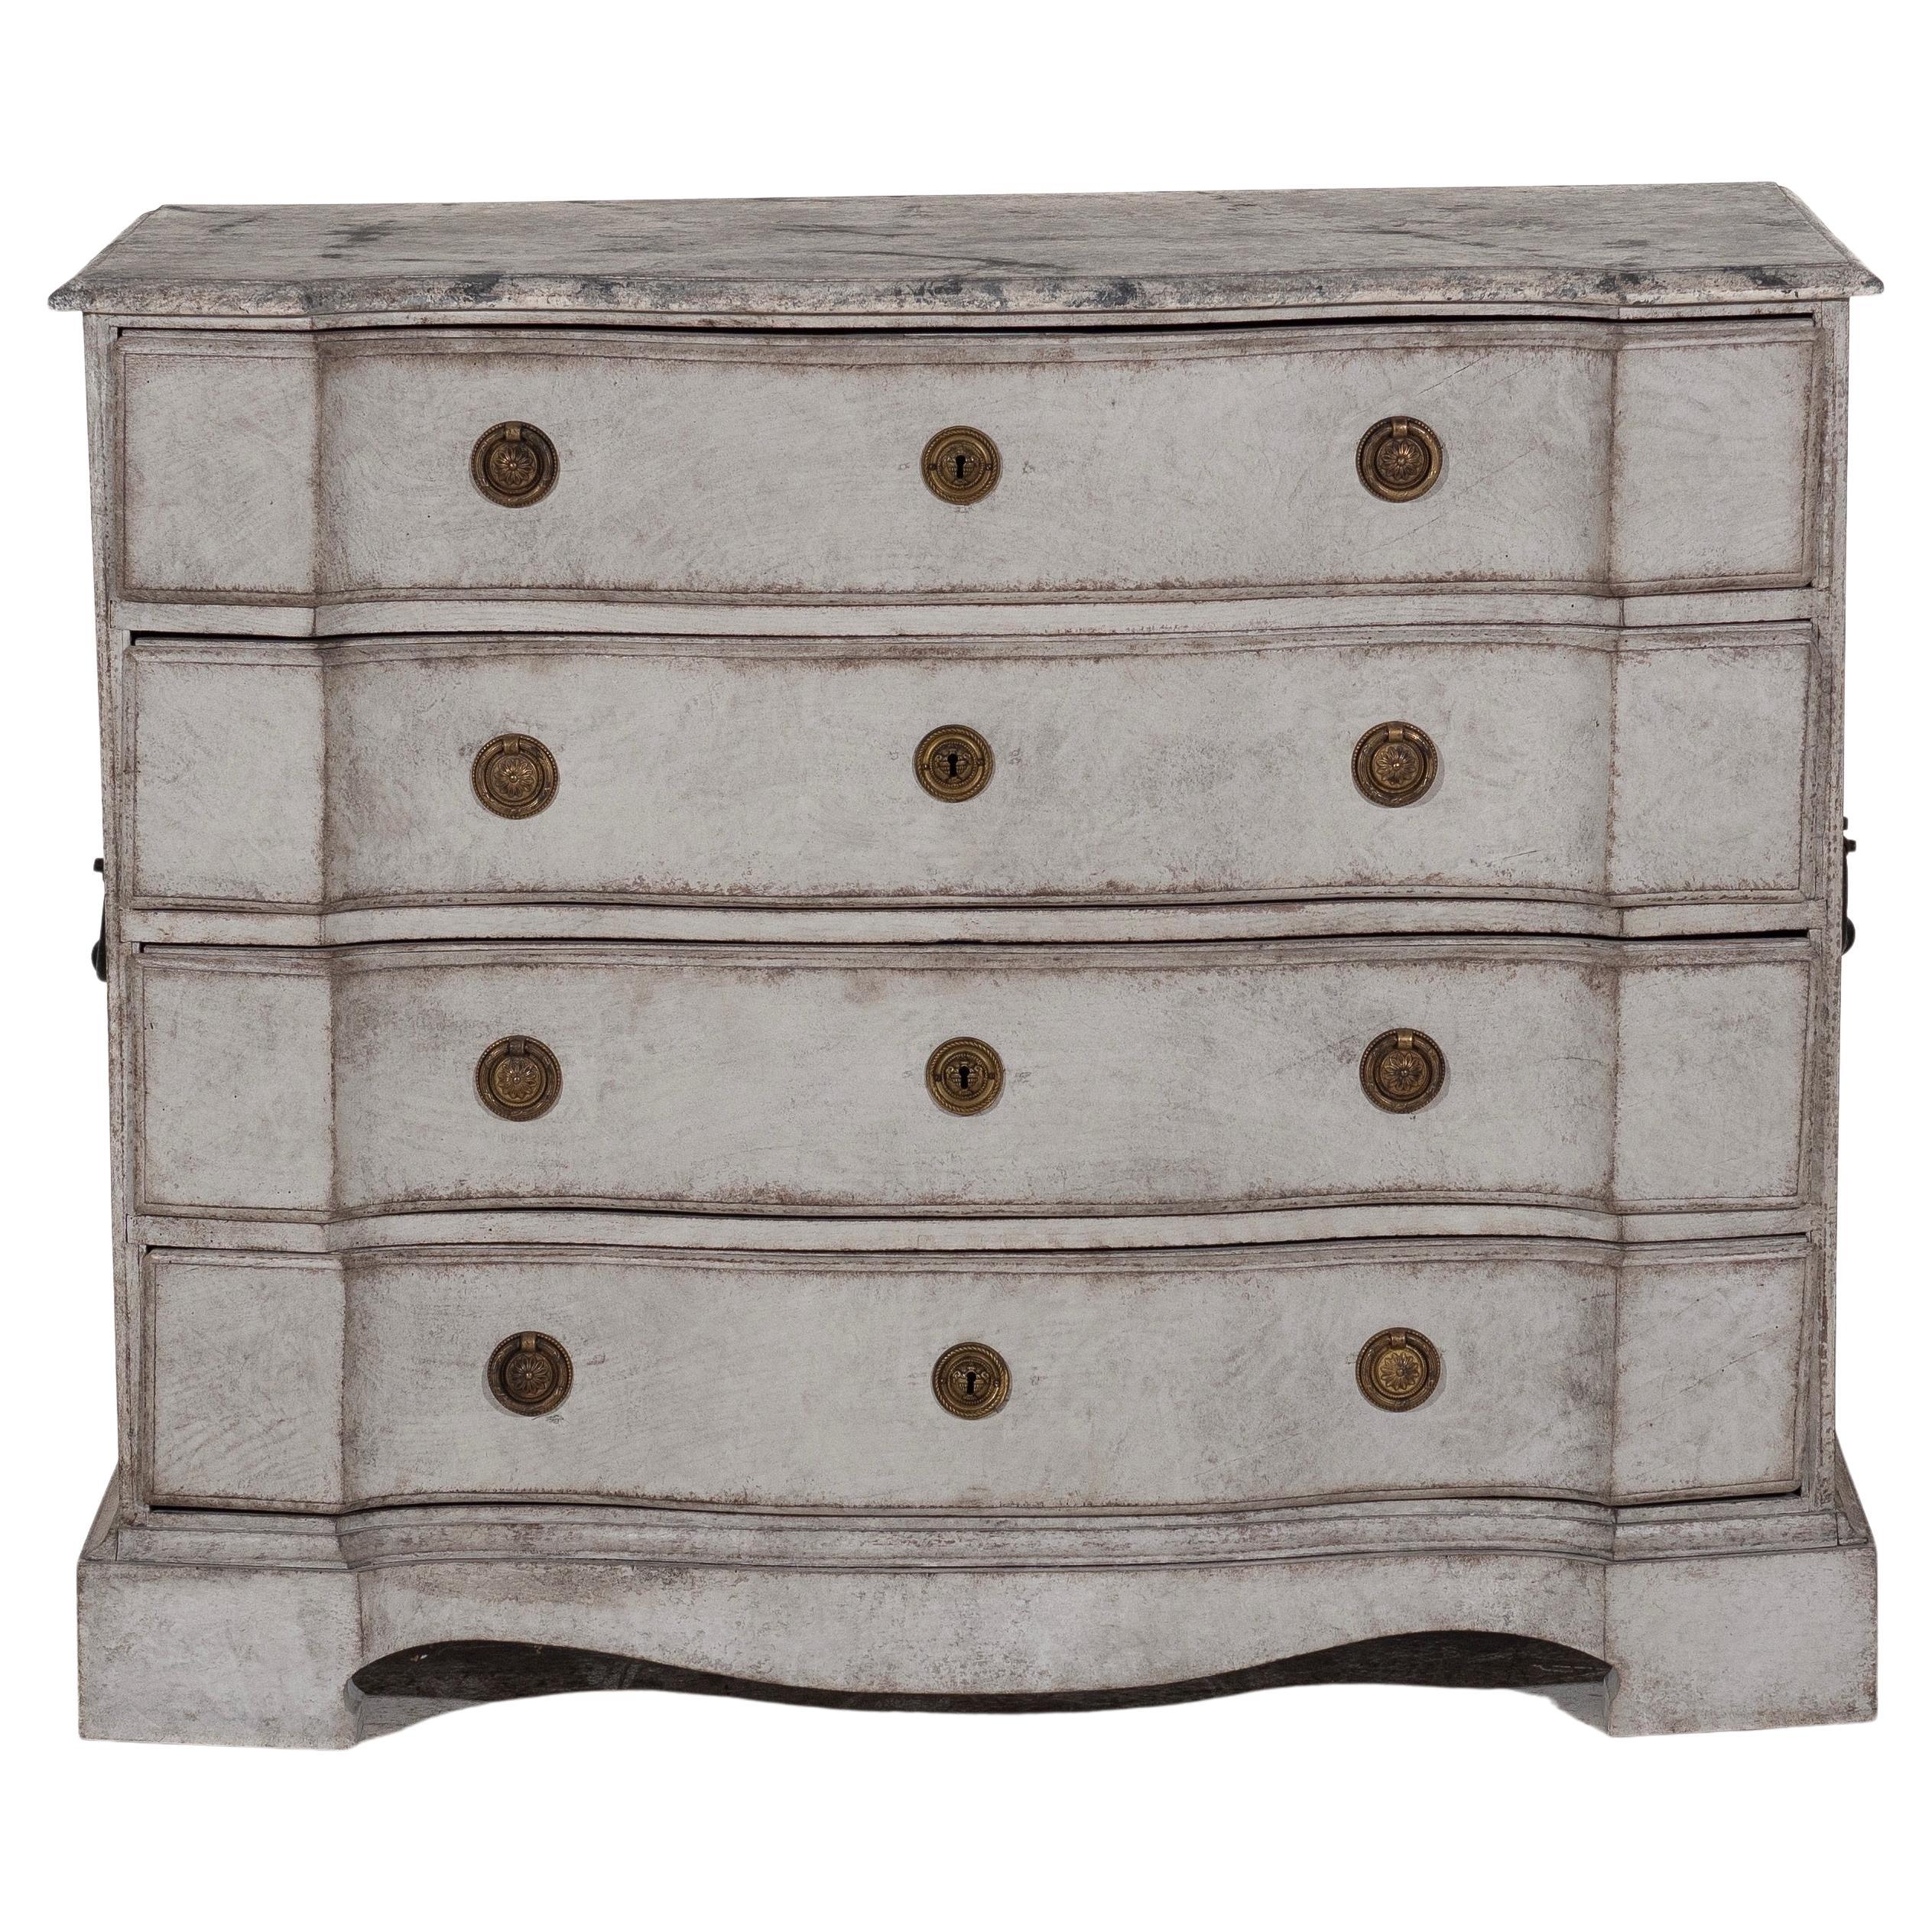 Very fine and rare chest of drawers, circa 1750